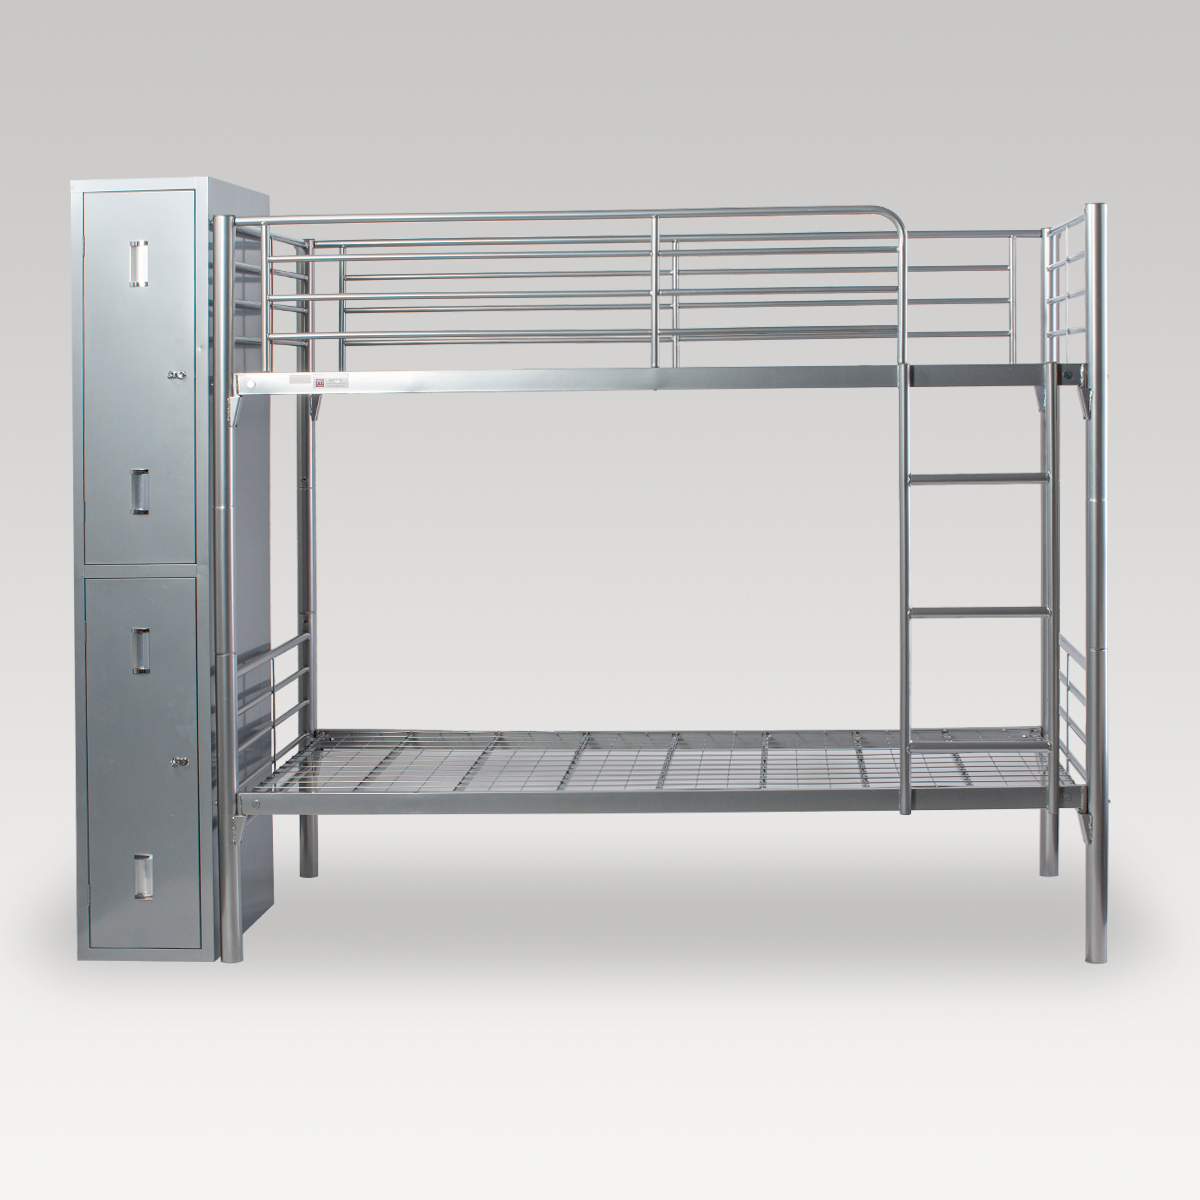 Image of Makers Stacka Commercial Bunk